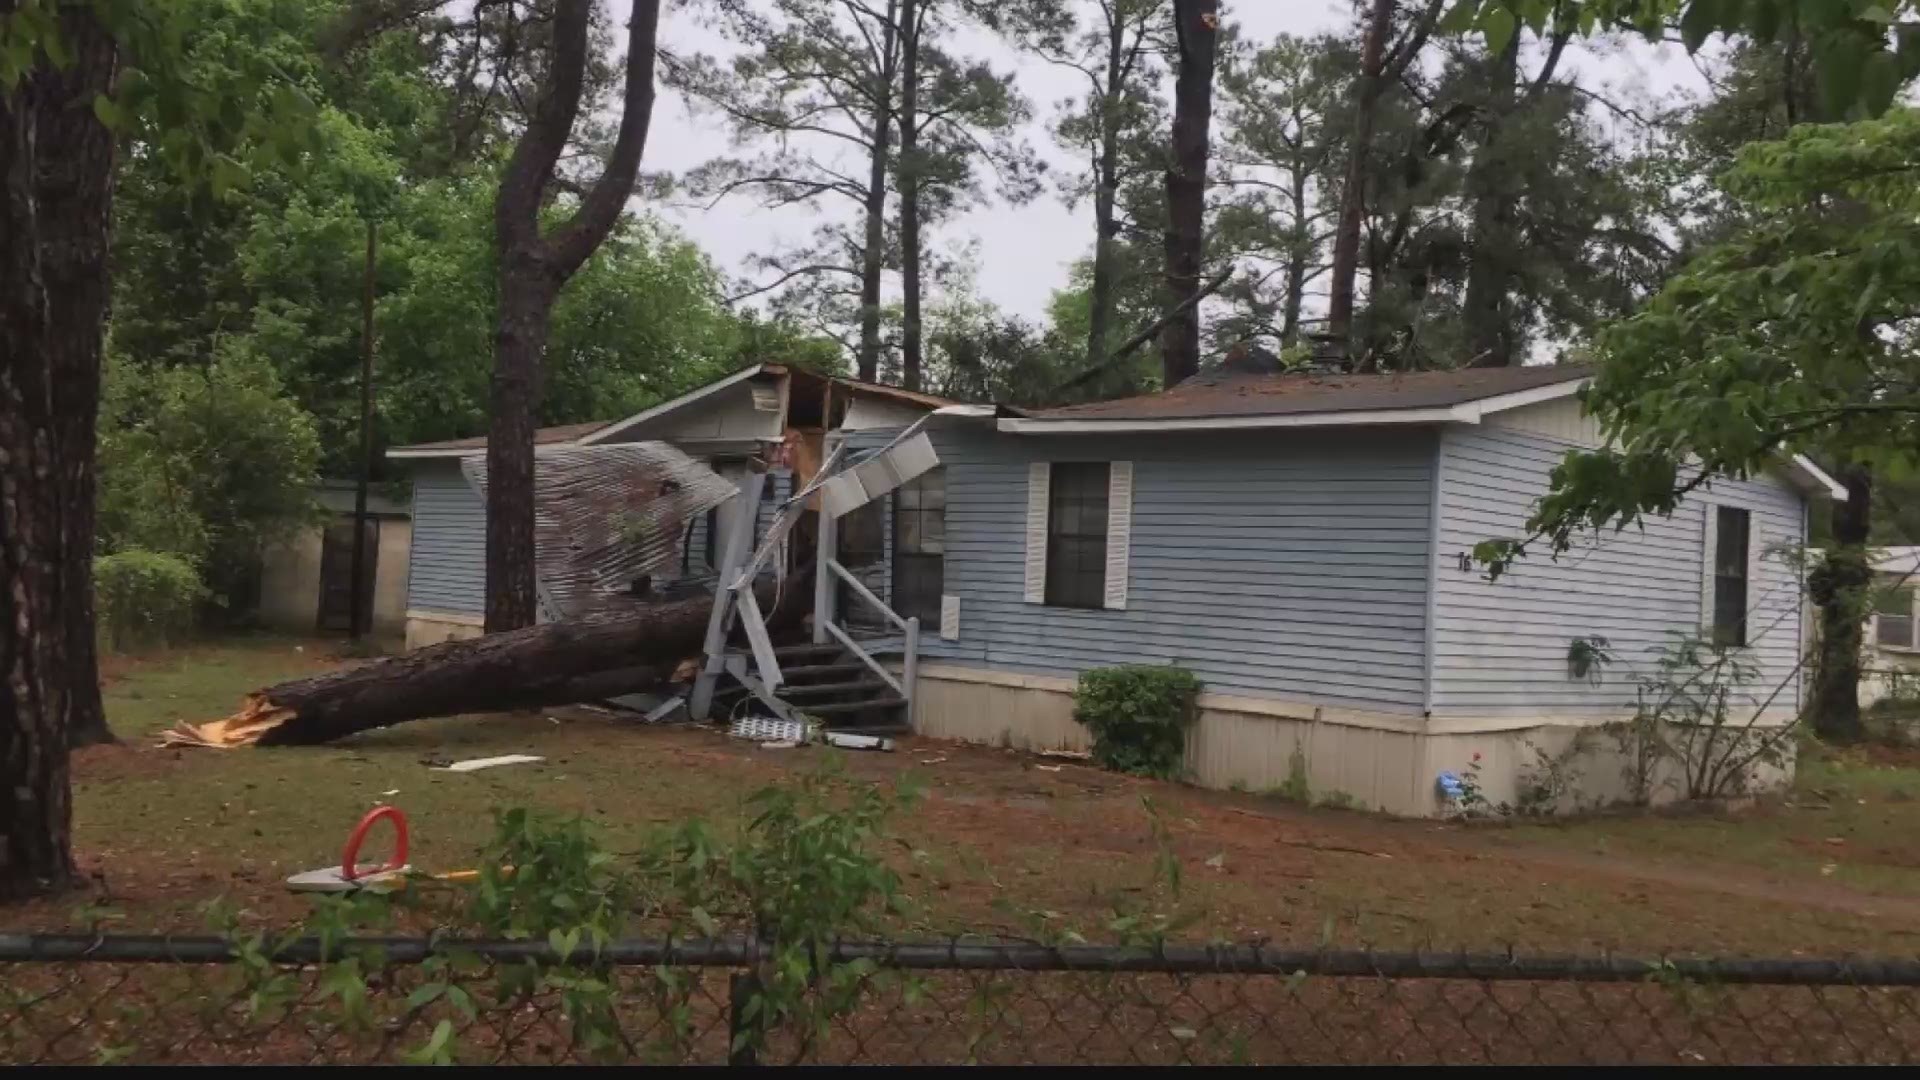 The little boy had to be taken to the hospital after high winds sent a tree crashing down on his home.